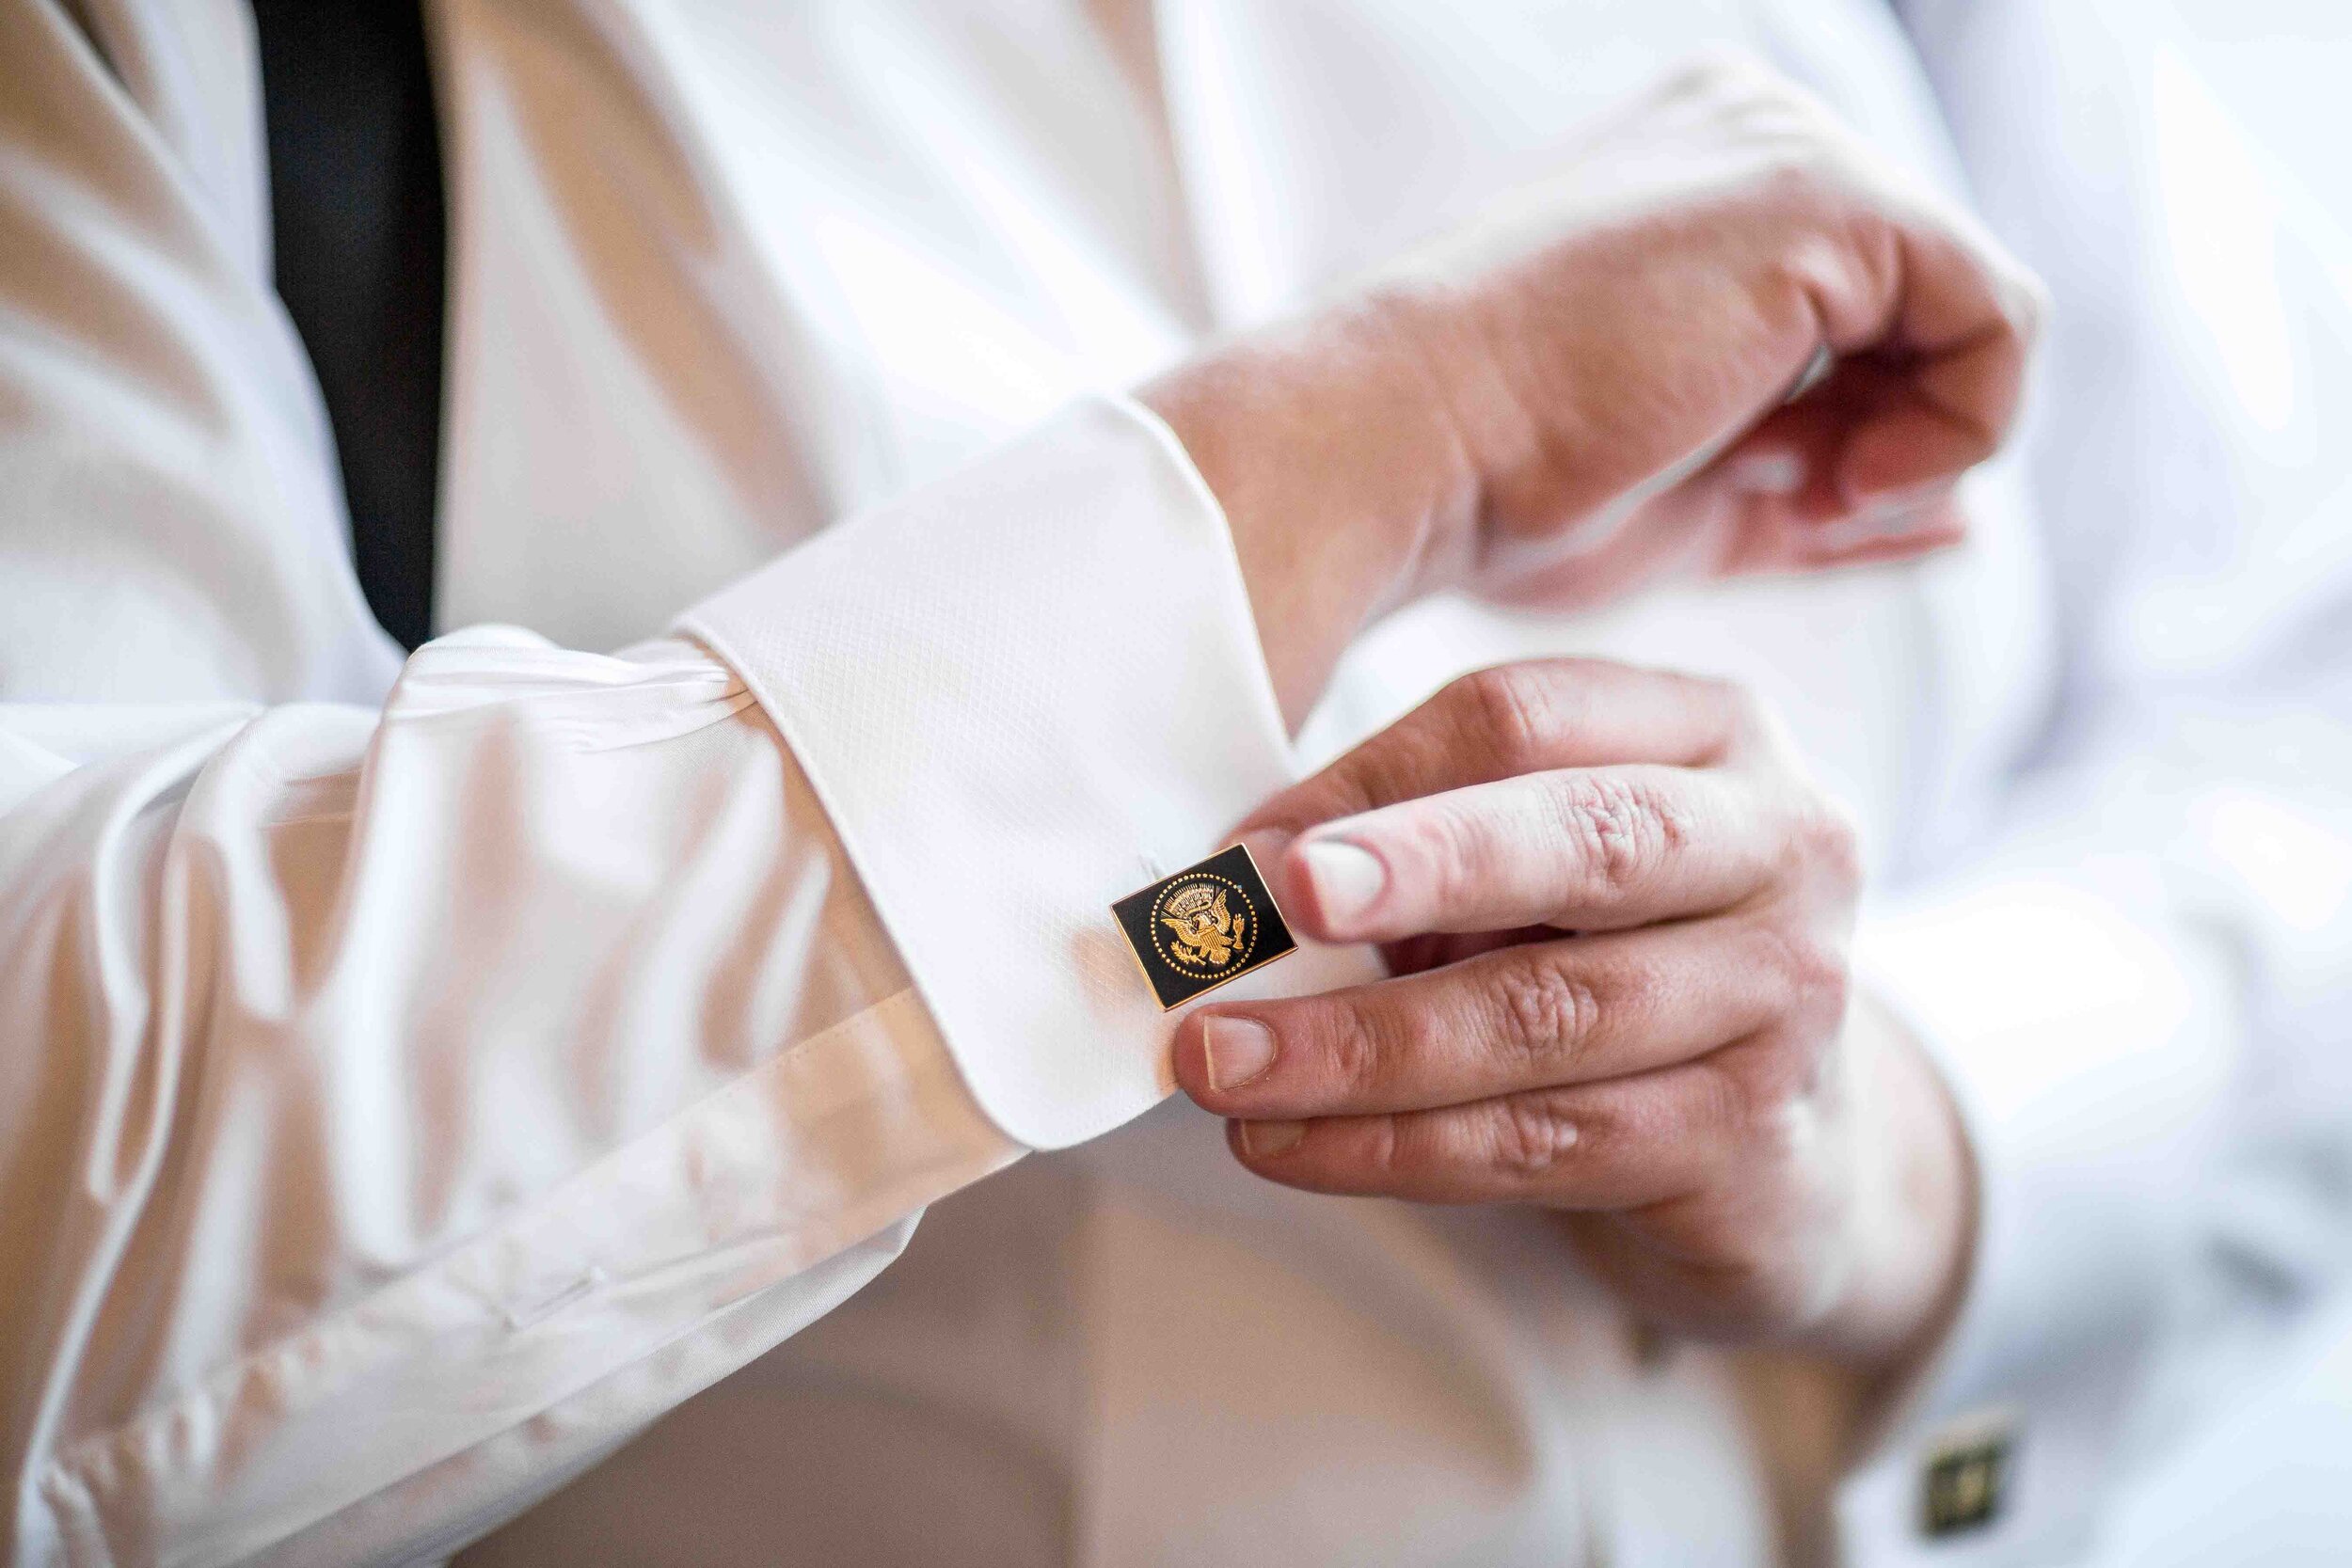 Presidential Cufflinks on a groom at New York Palace Hotel